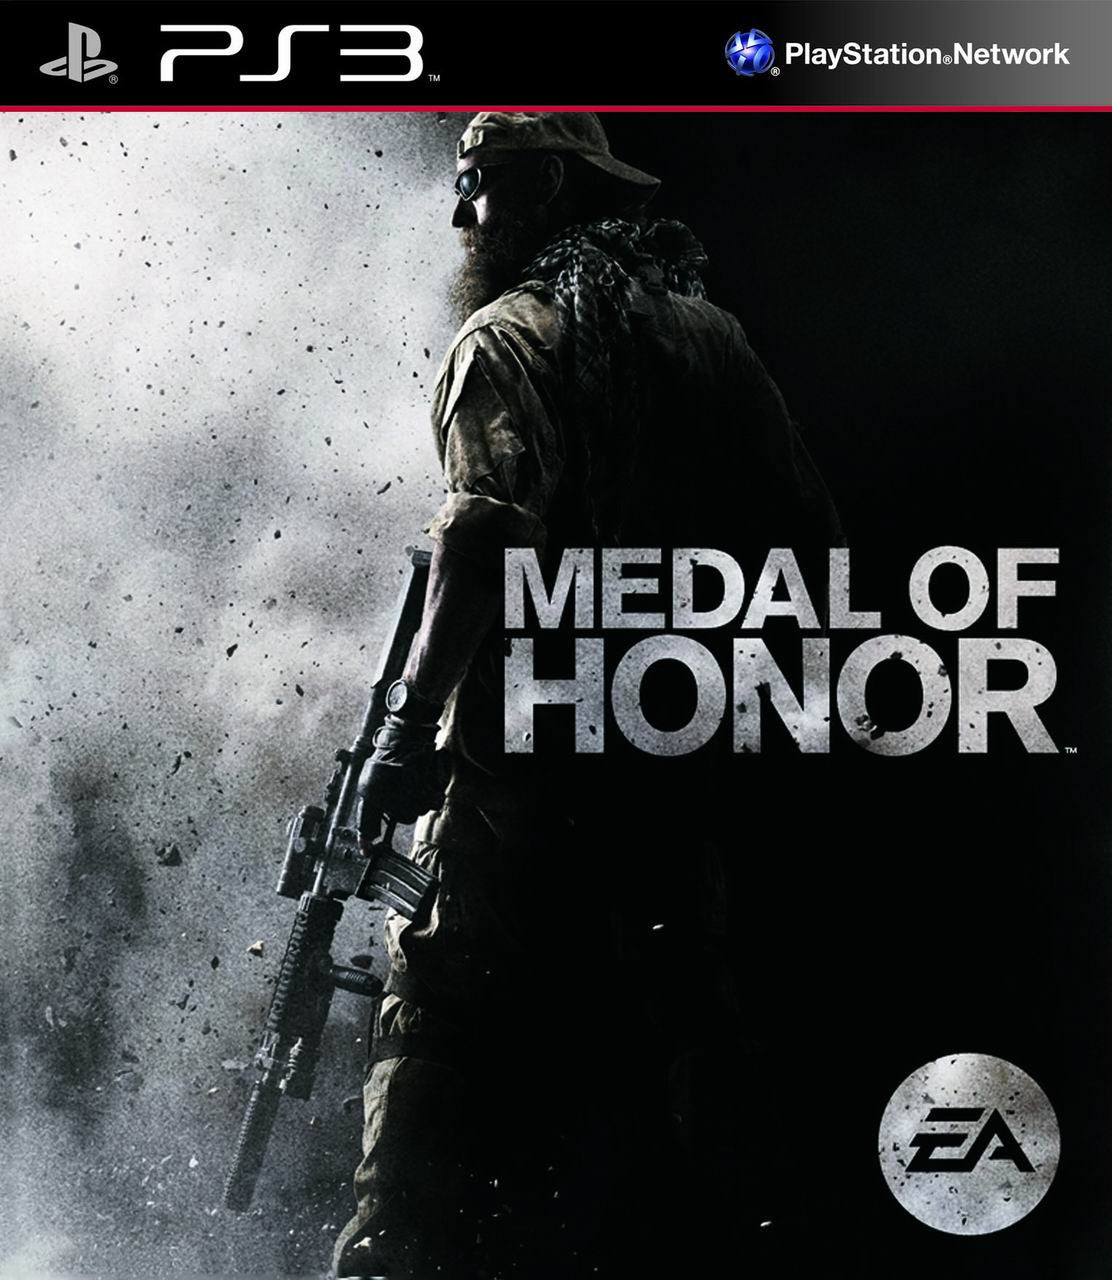 Medal of Honor Limited Edition - PS3 (Pre-owned)